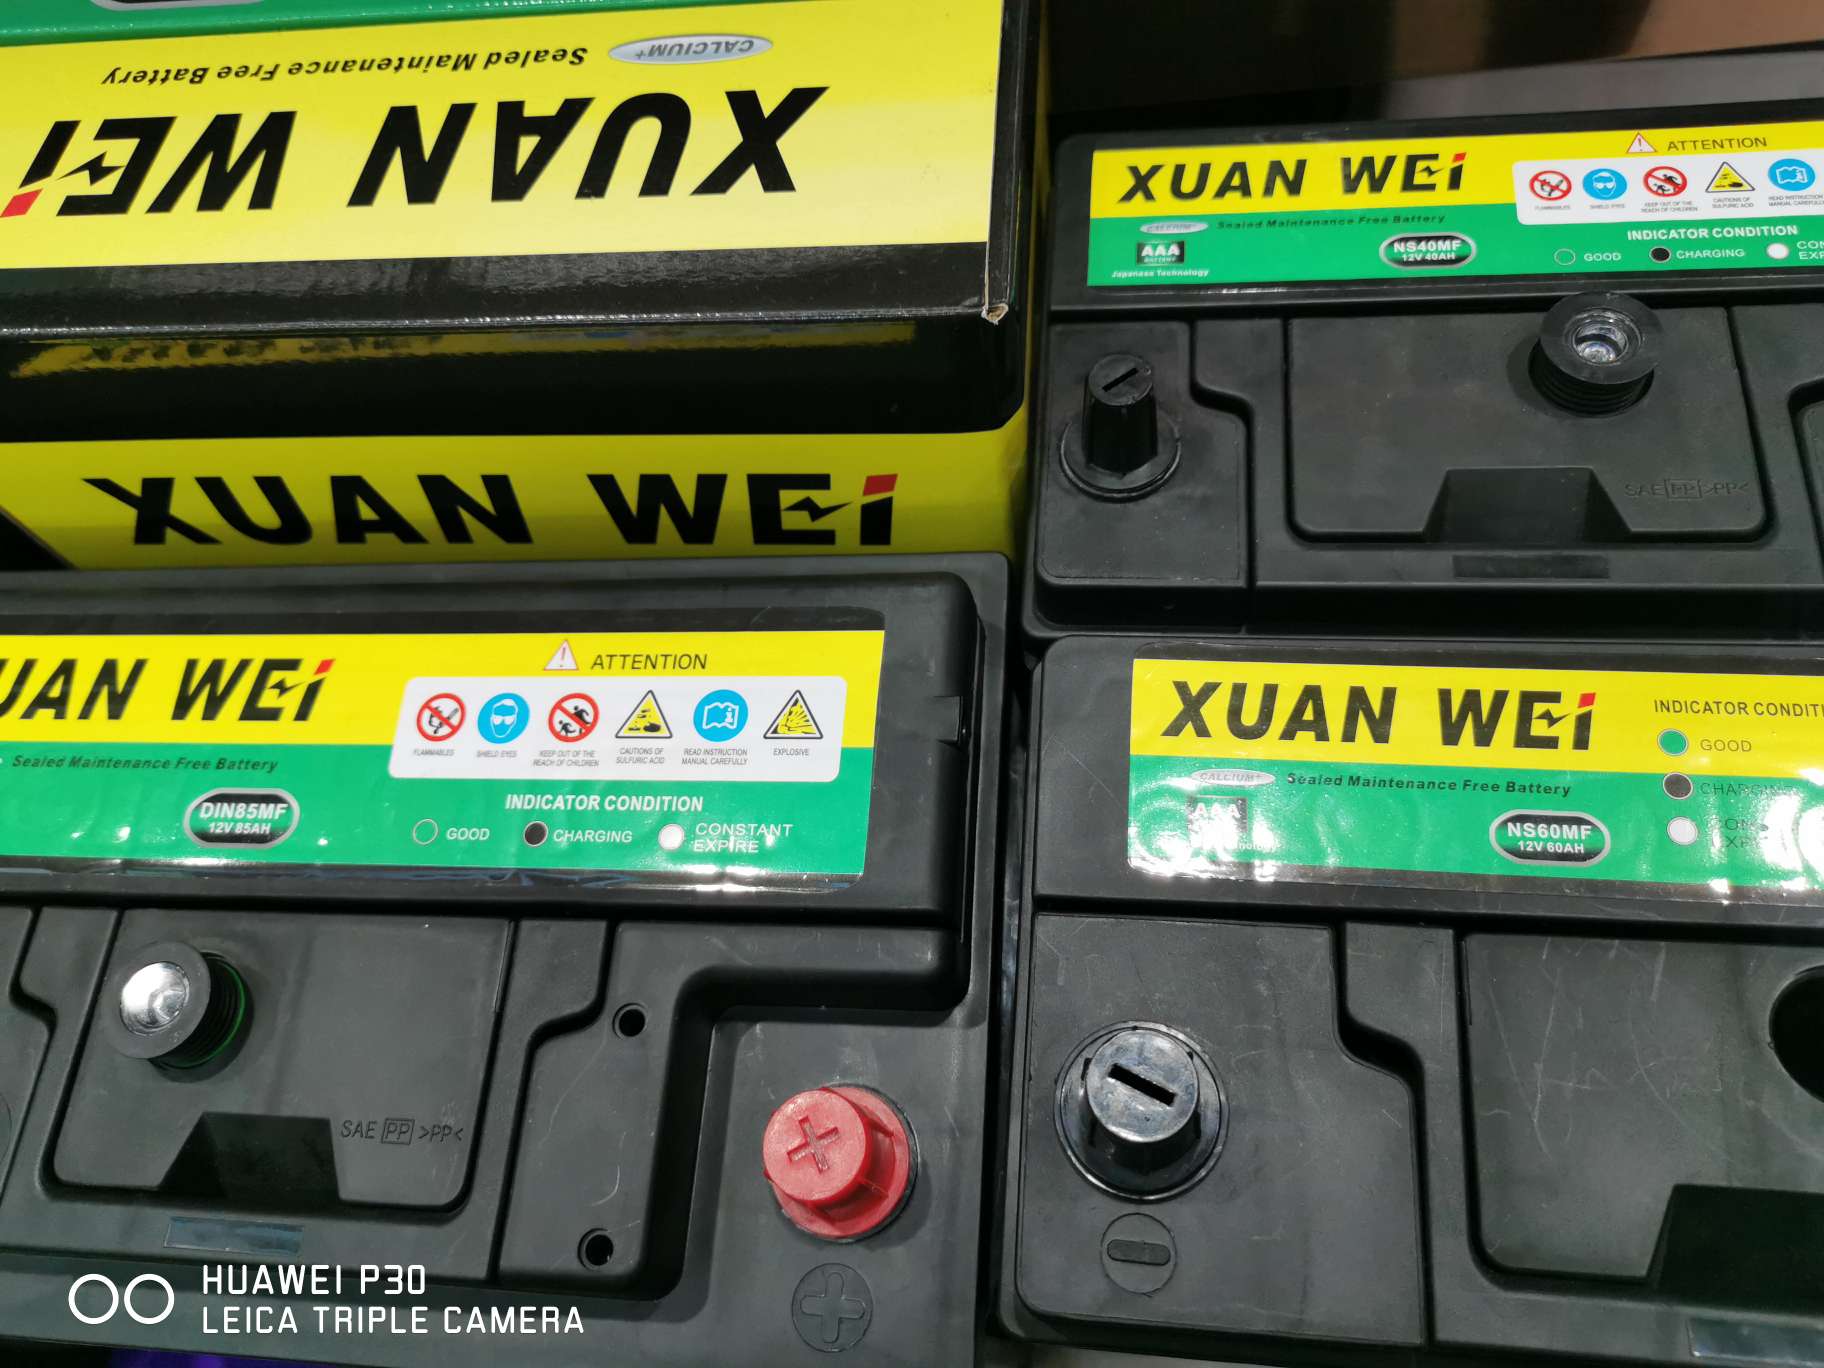 Safety 12V40AH battery XUanweinP7-12 maint-free lead-acid battery fire alarm rechargeable battery standby medium Item Picture